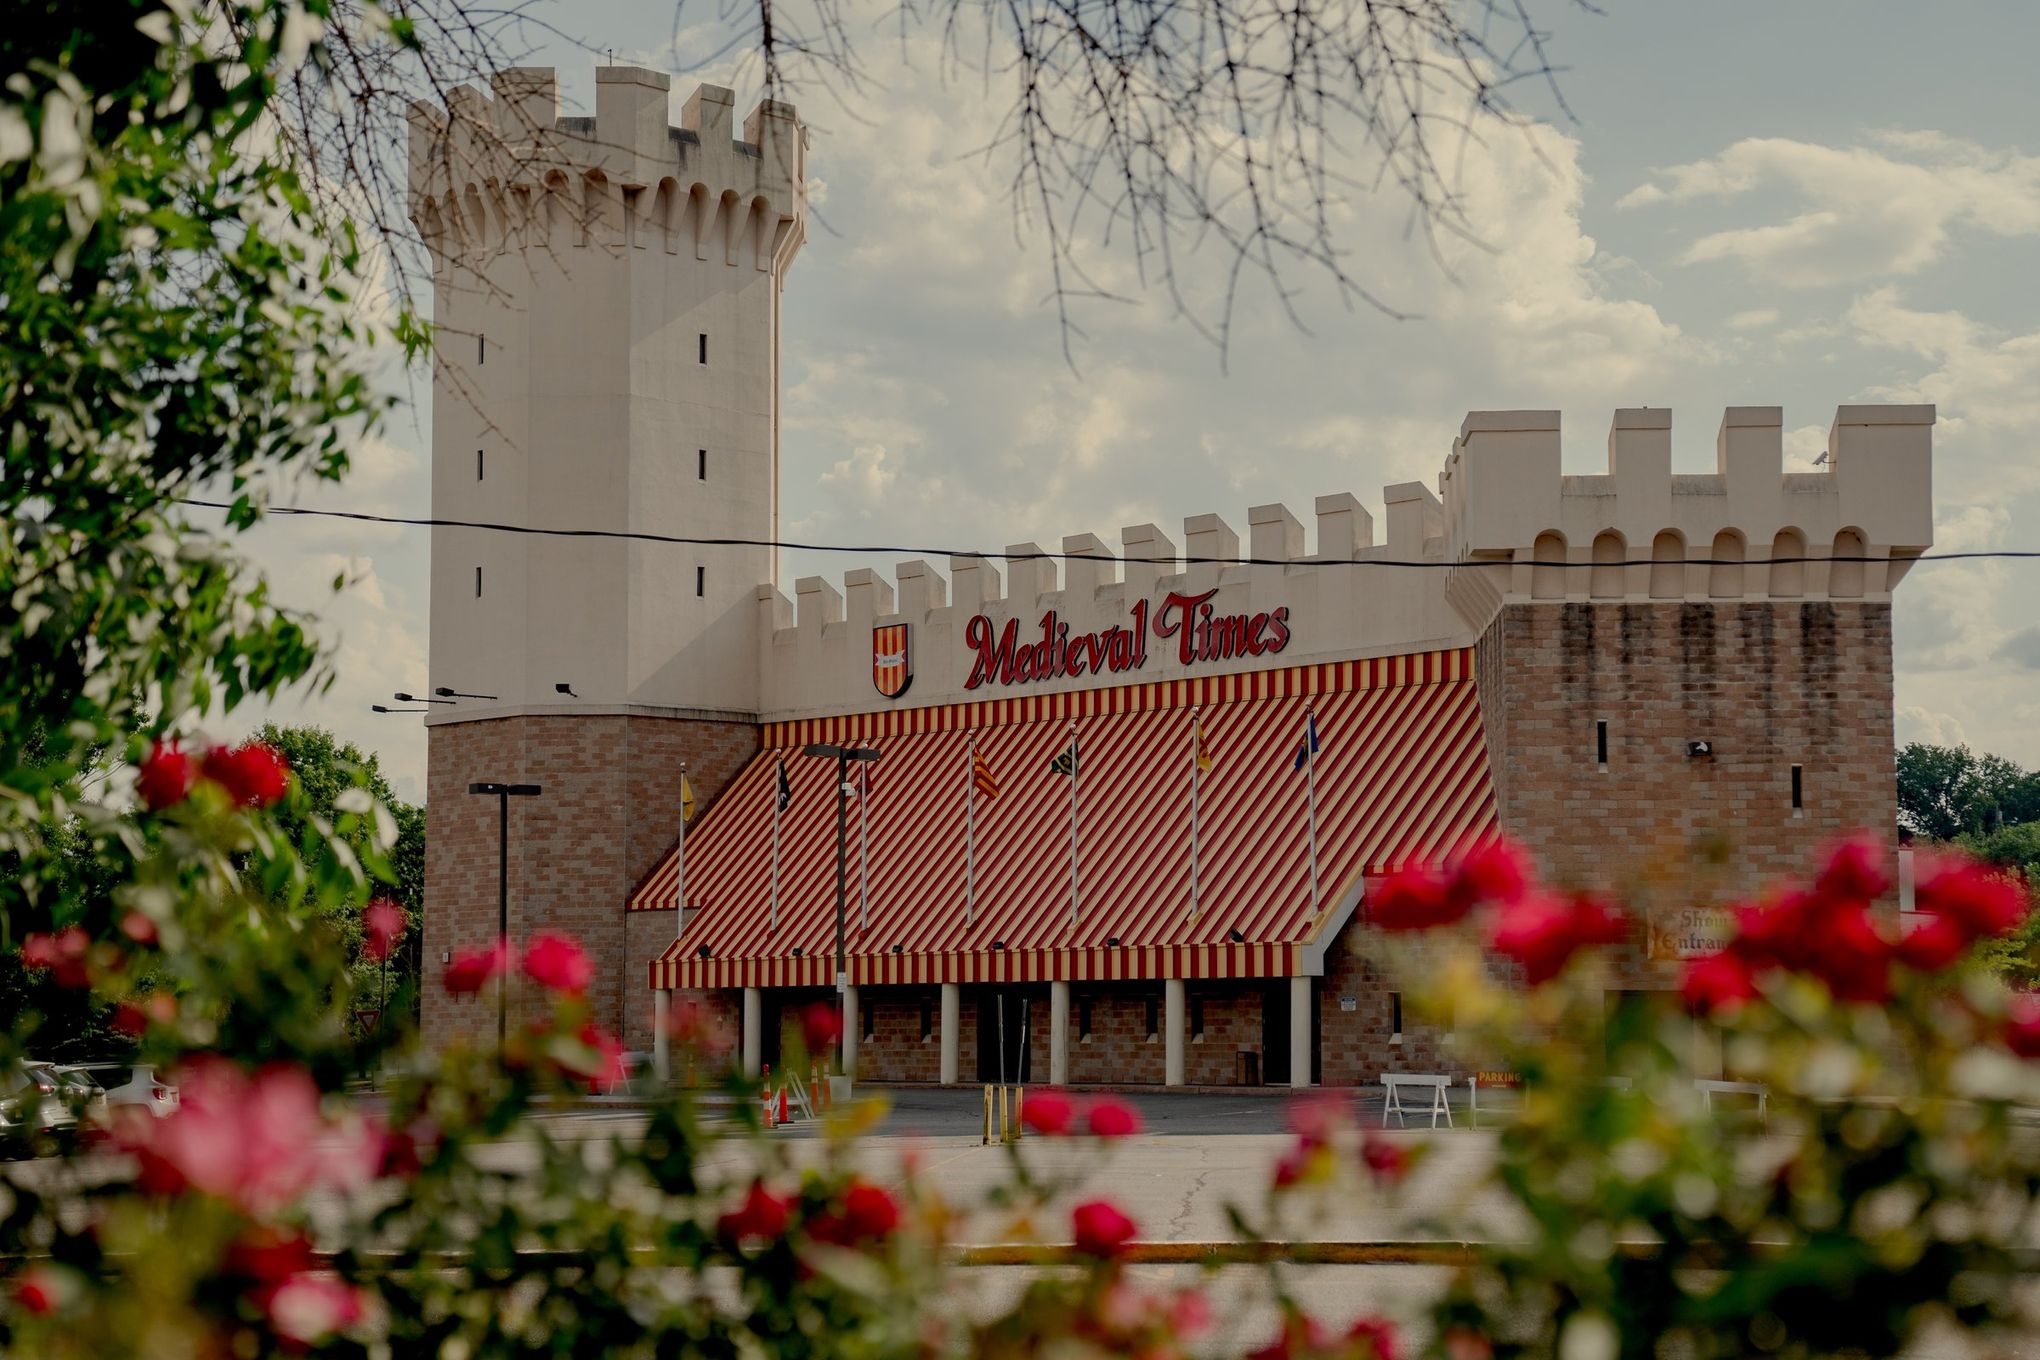 Medieval Times in Scottsdale is looking for a few good knights